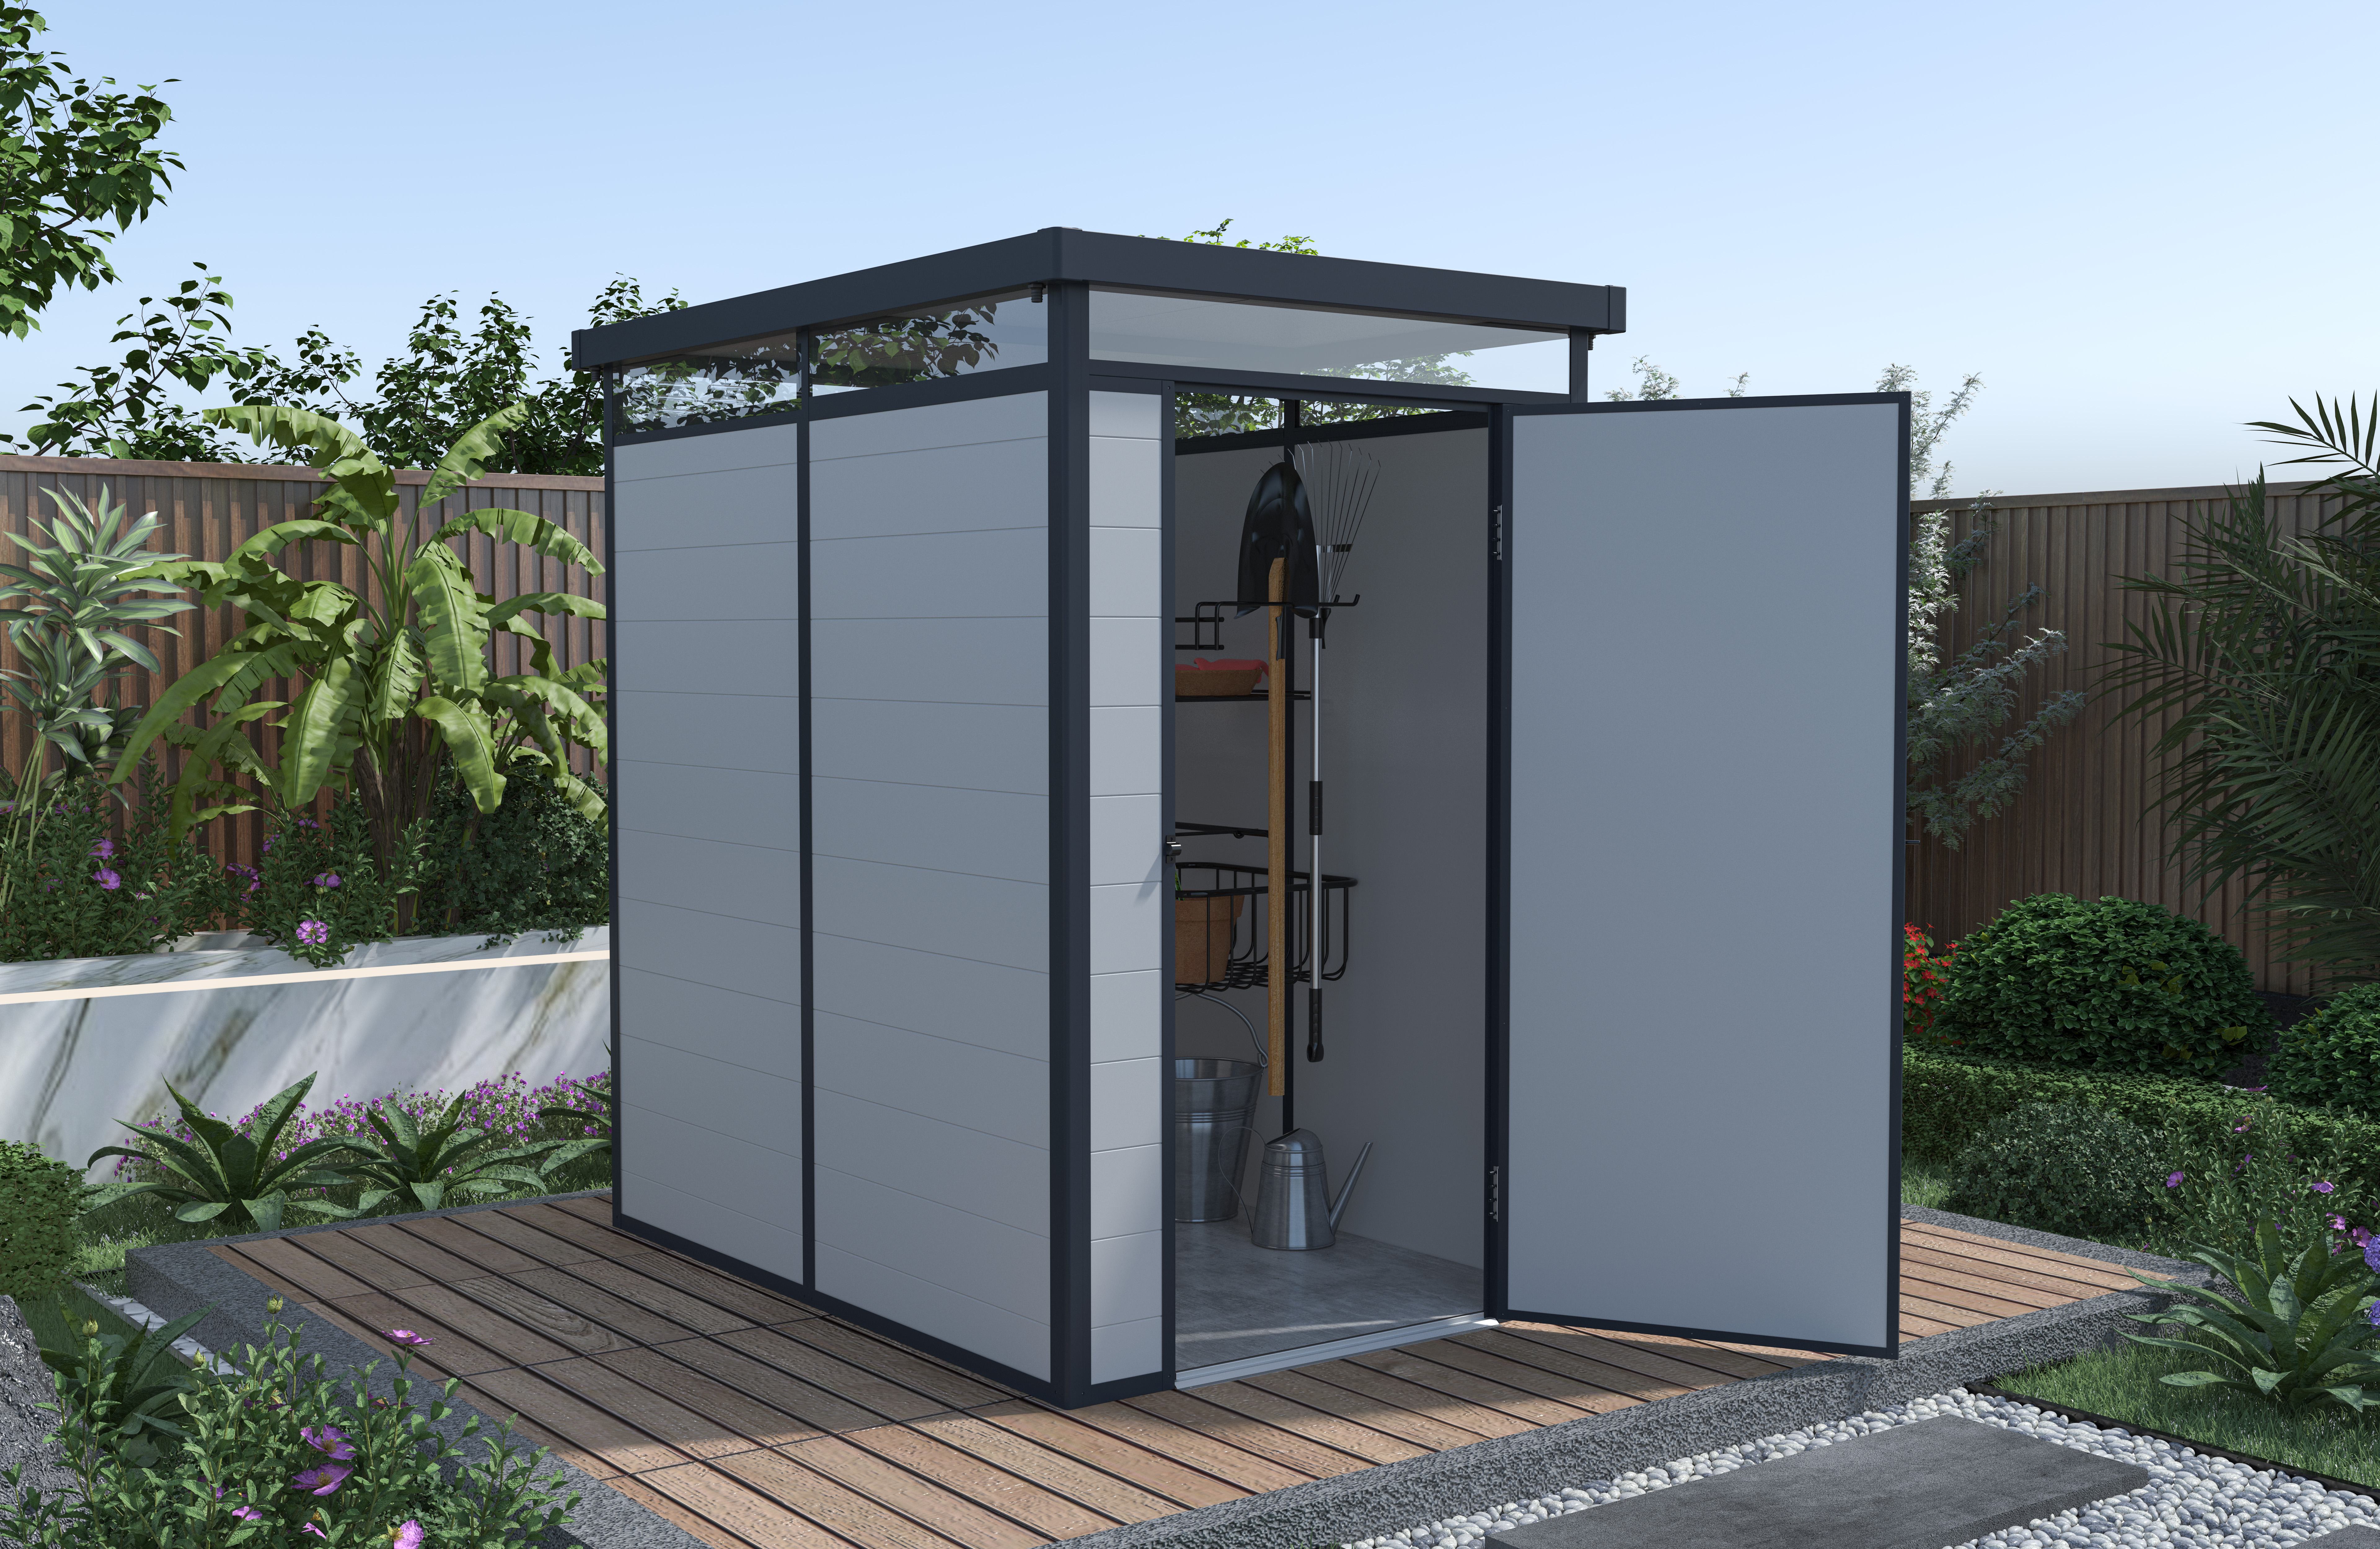 BillyOh York Pent White Plastic Shed - 4x6 Grey from Garden Buildings Direct